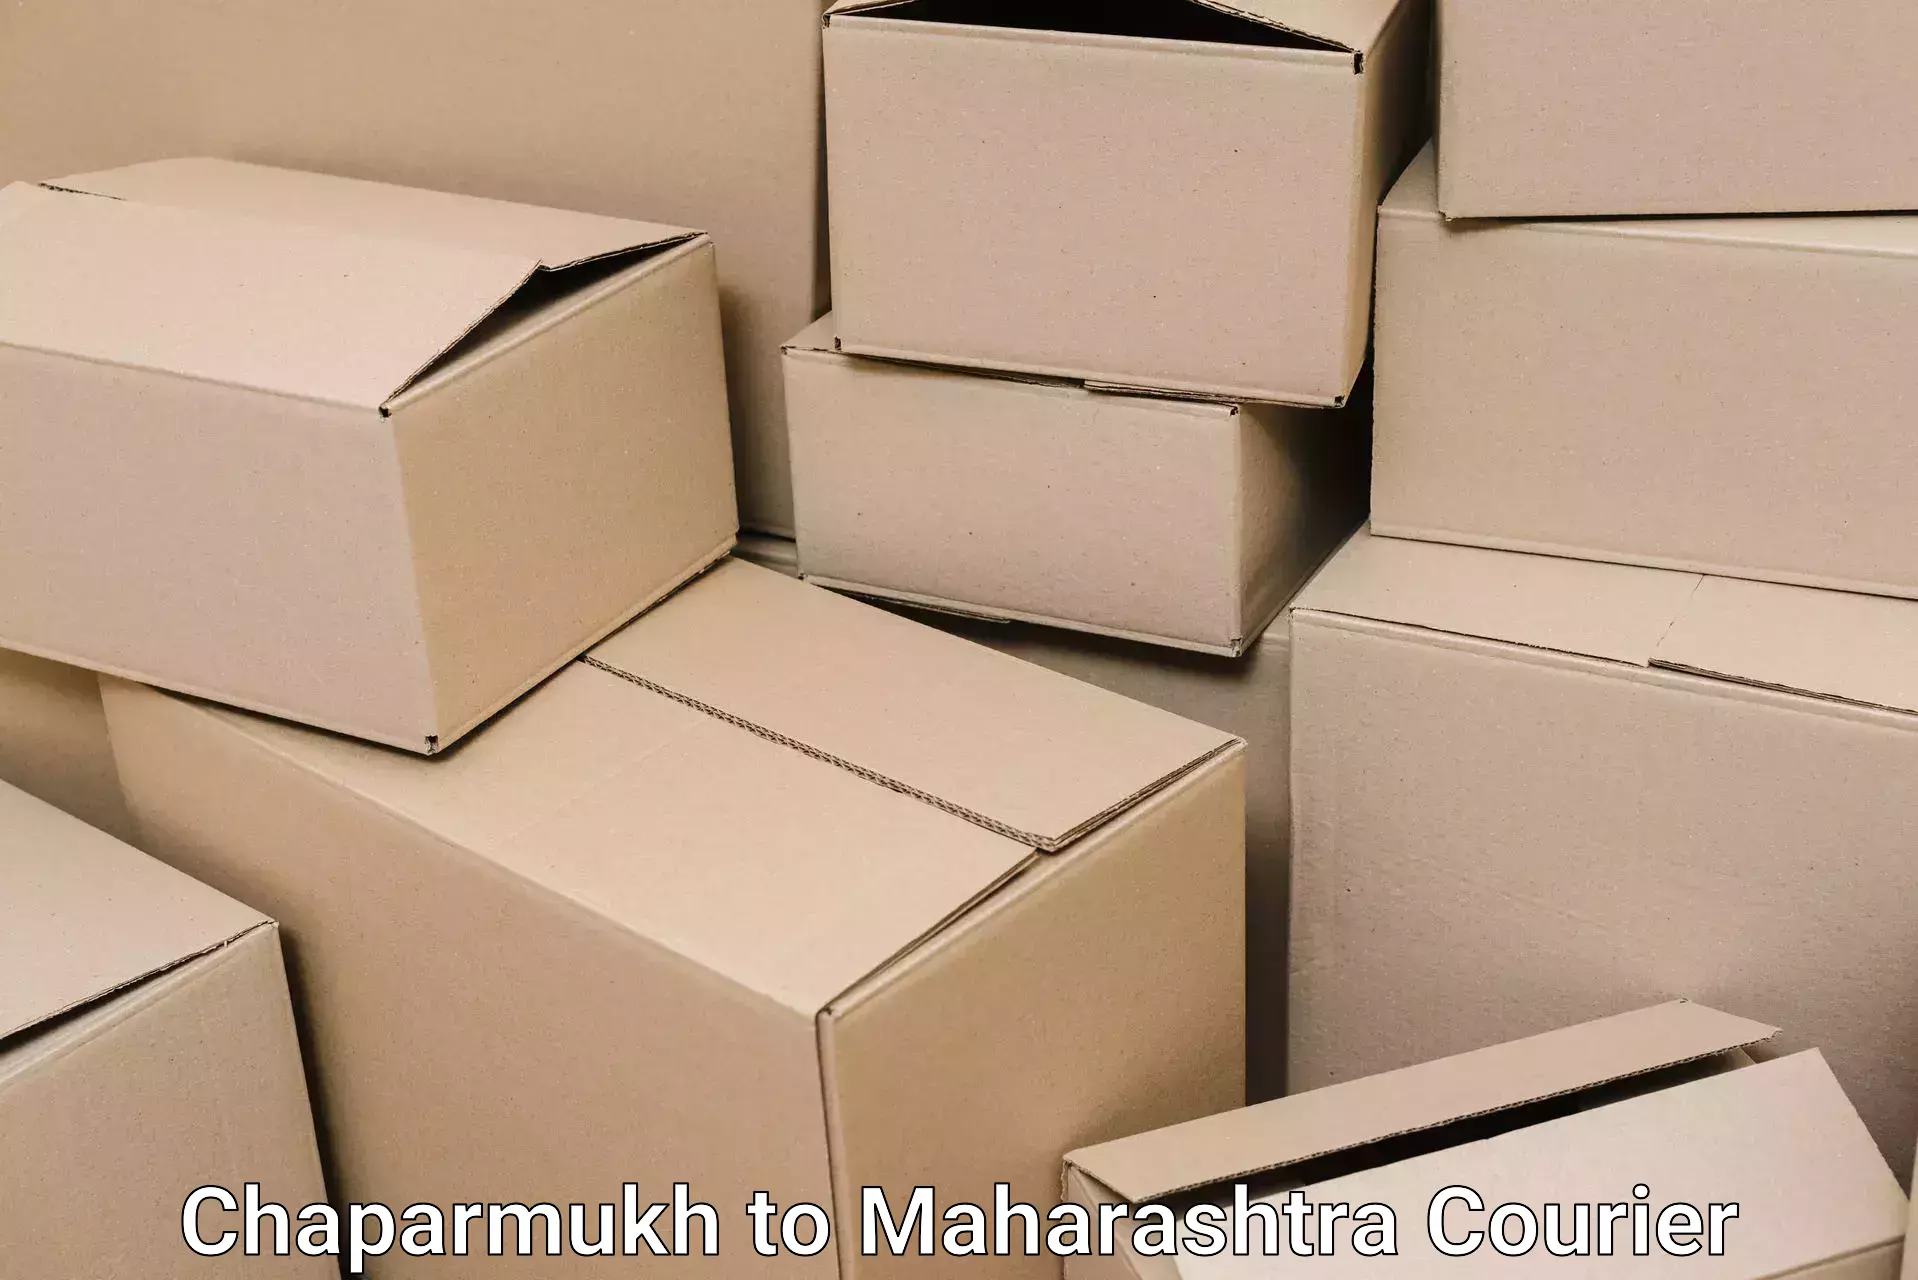 Efficient packing and moving Chaparmukh to Vairag